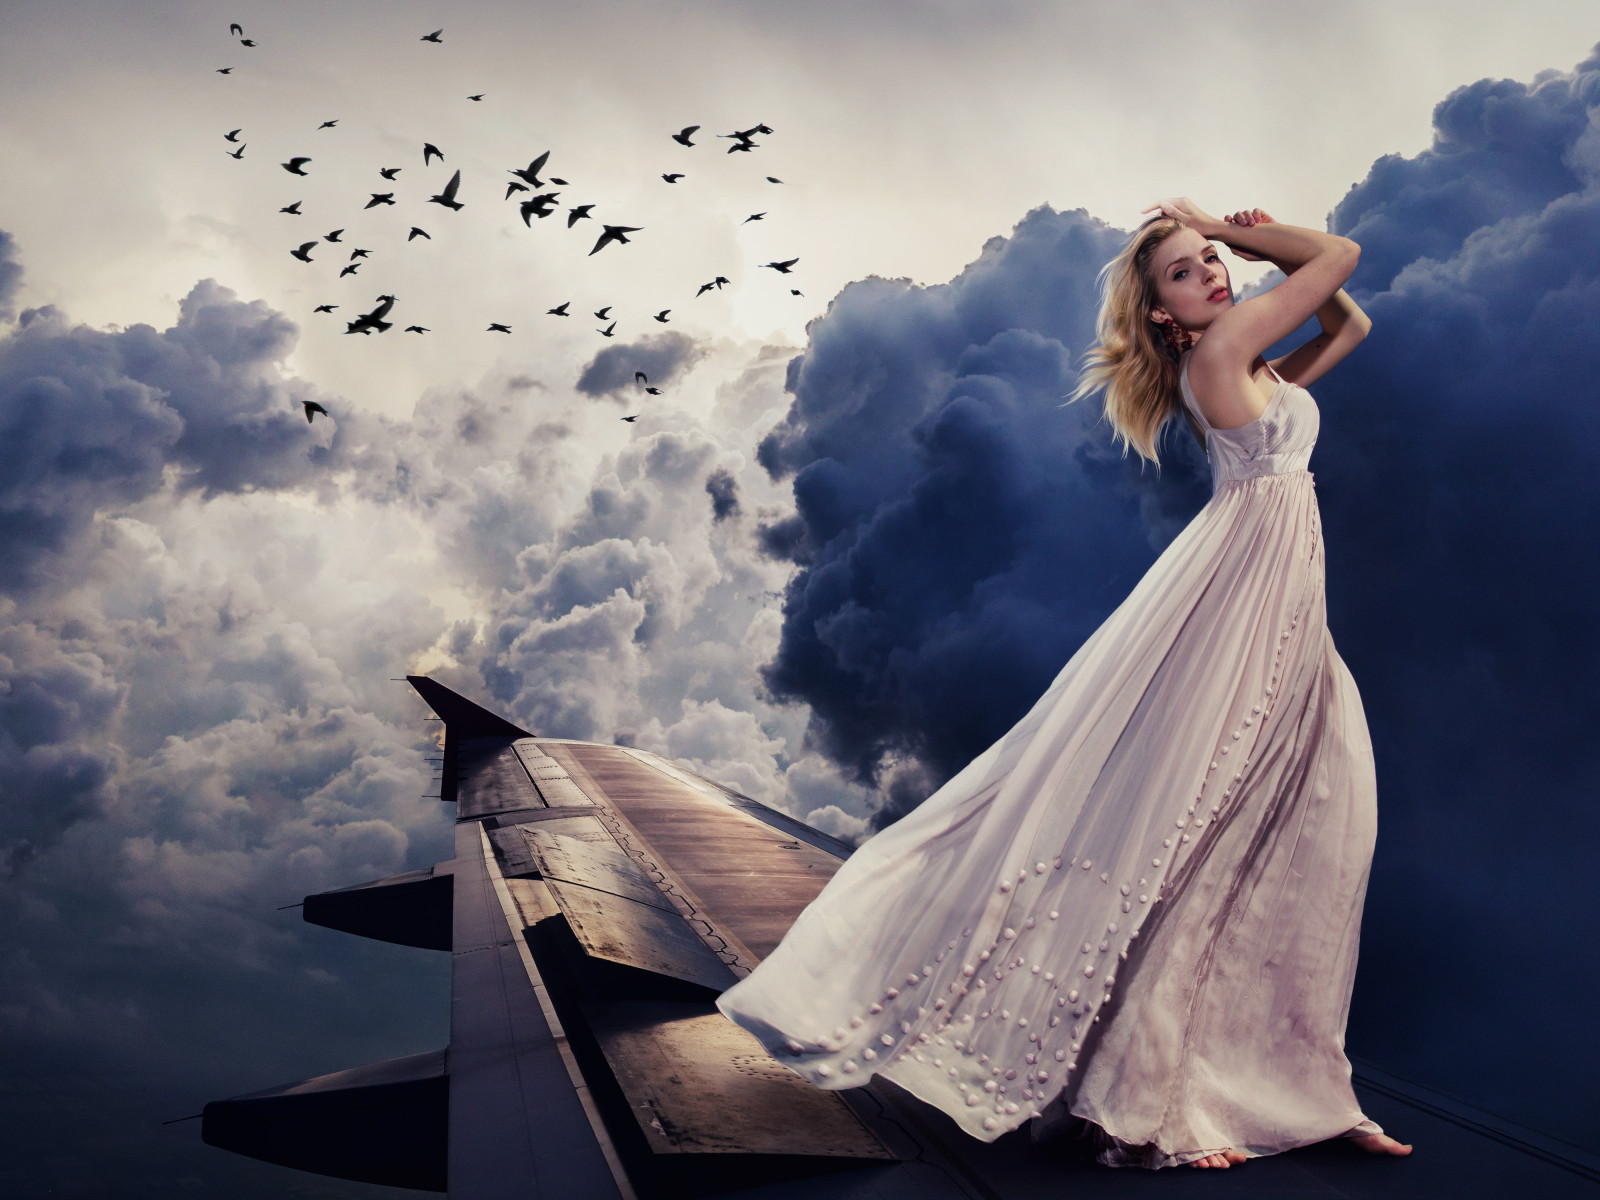 Beautiful girl on the airplane wing wallpaper 1600x1200